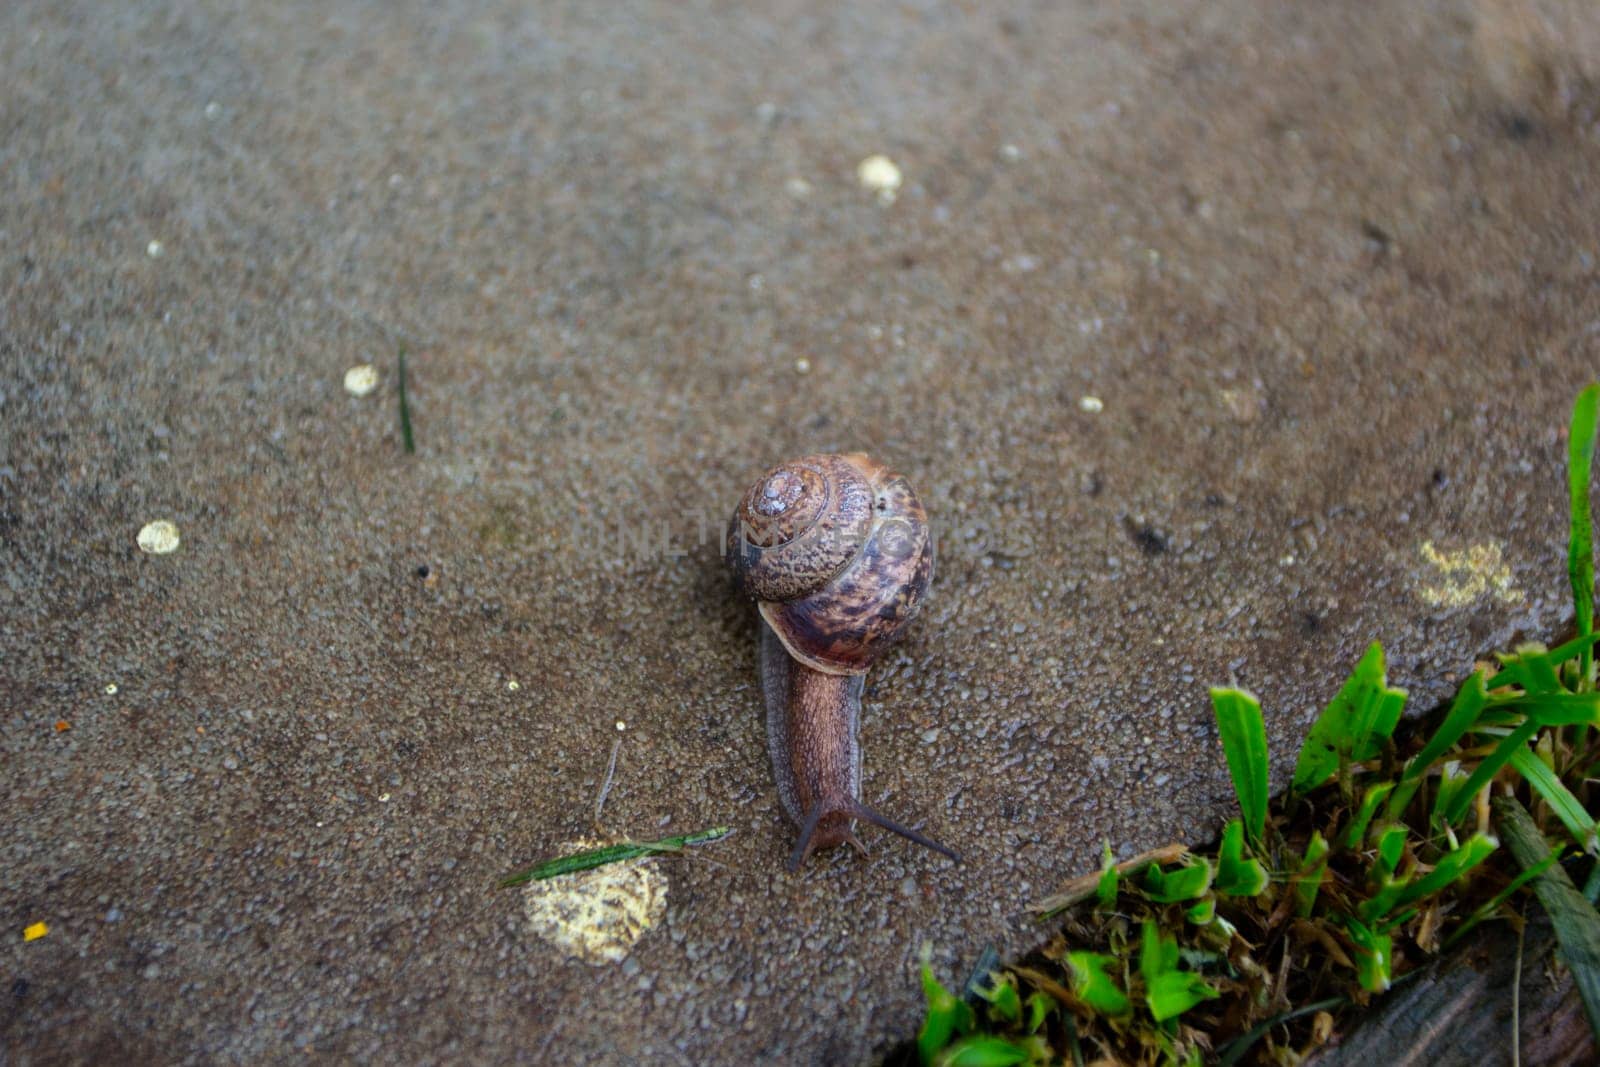 A snail crawls on concrete and green grass. Ecology and insects.